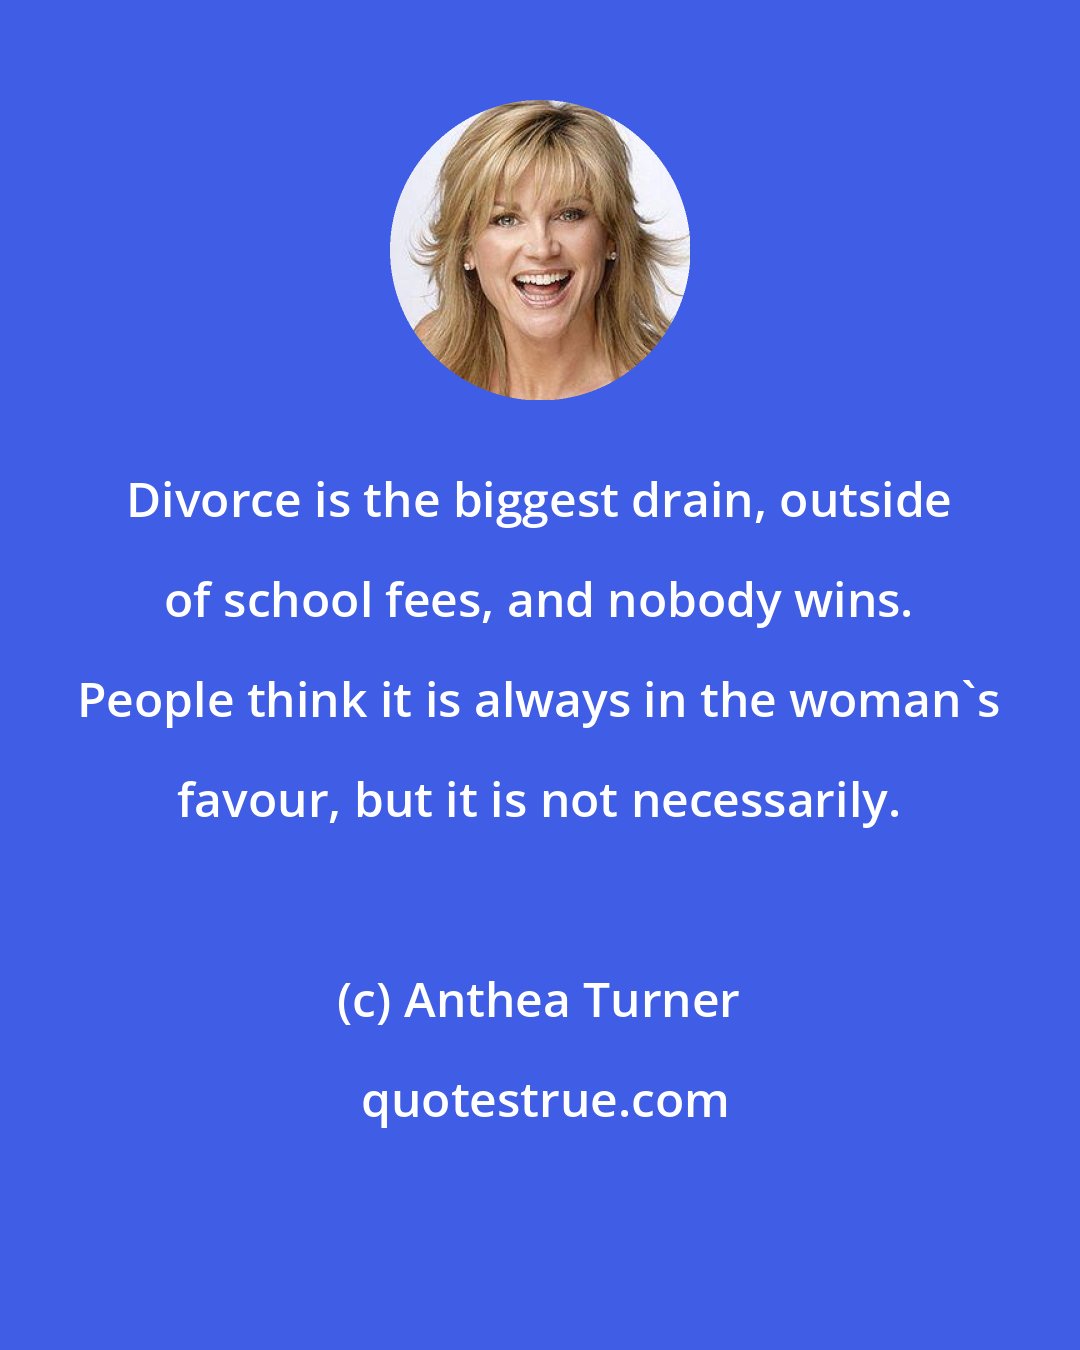 Anthea Turner: Divorce is the biggest drain, outside of school fees, and nobody wins. People think it is always in the woman's favour, but it is not necessarily.